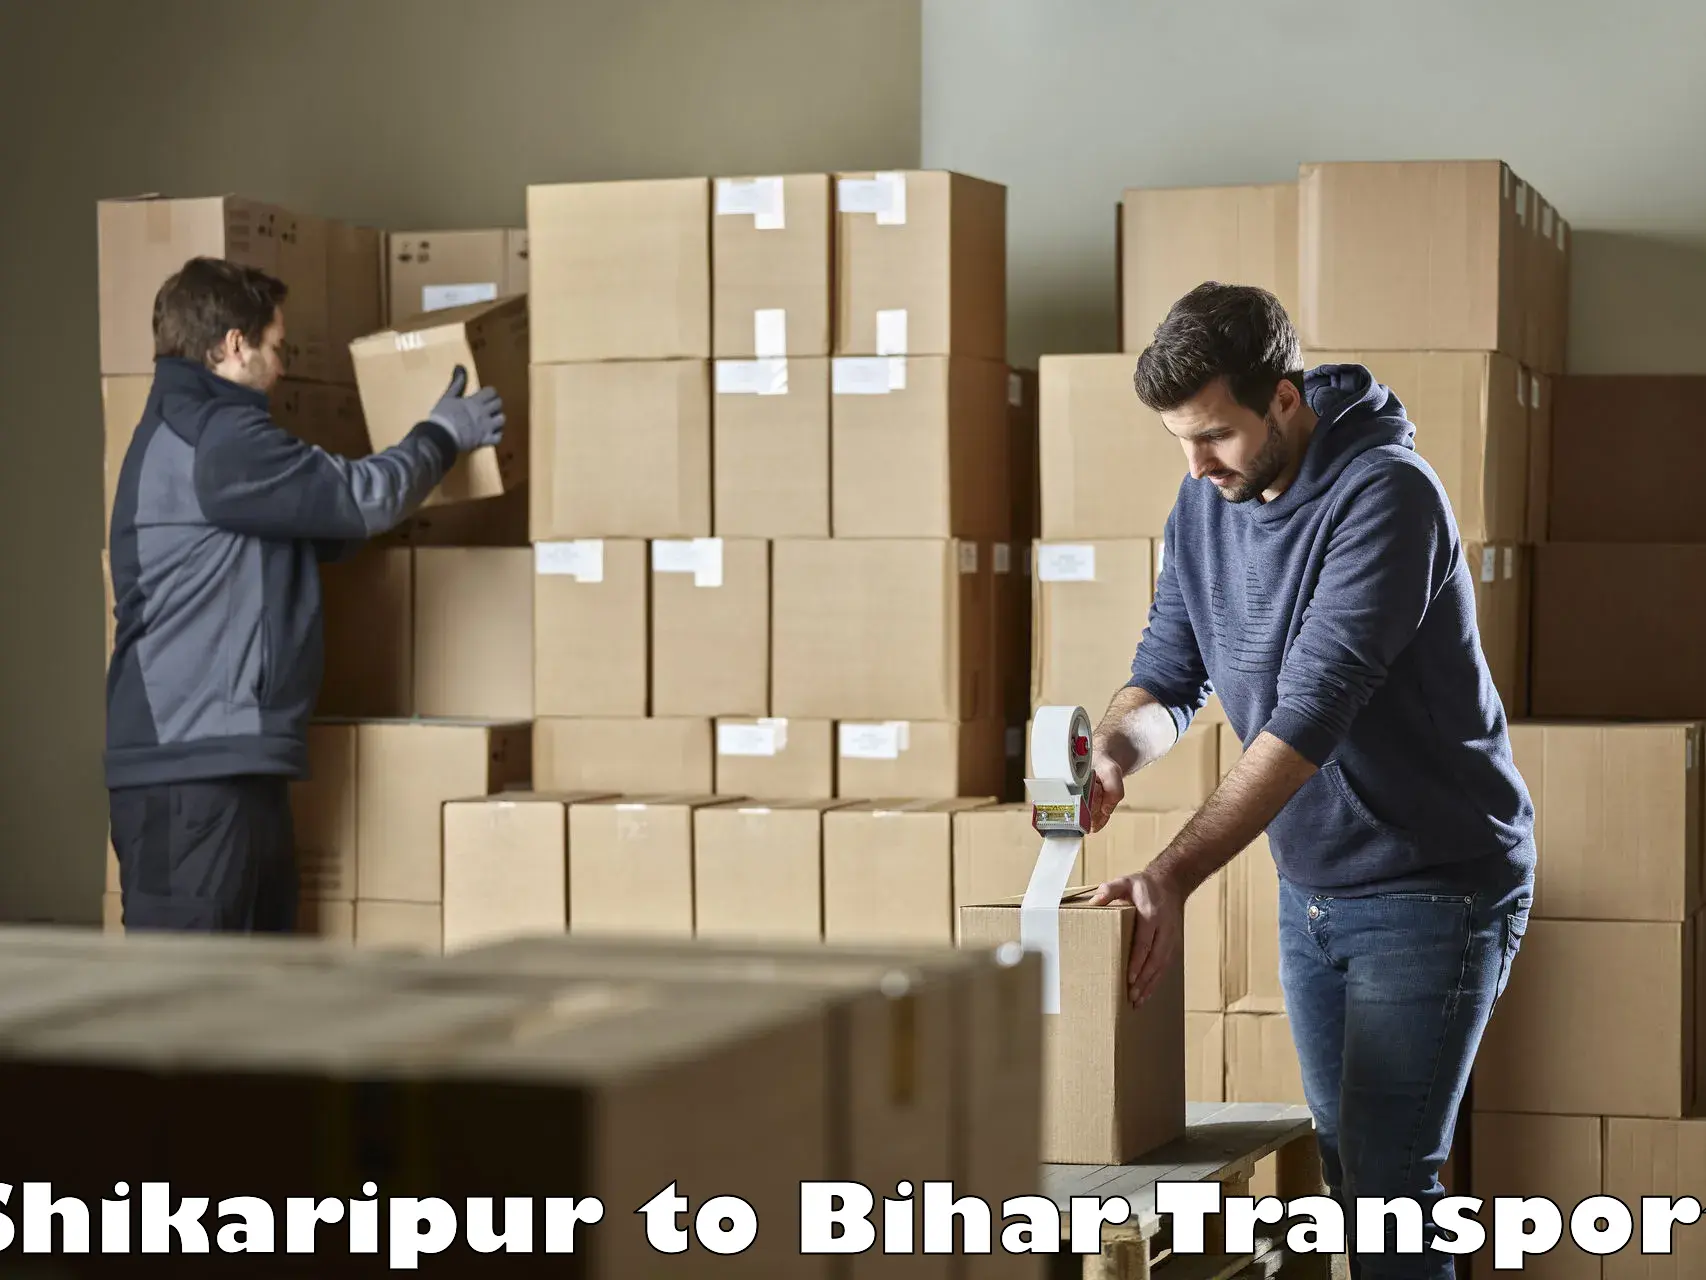 Delivery service Shikaripur to Bihar